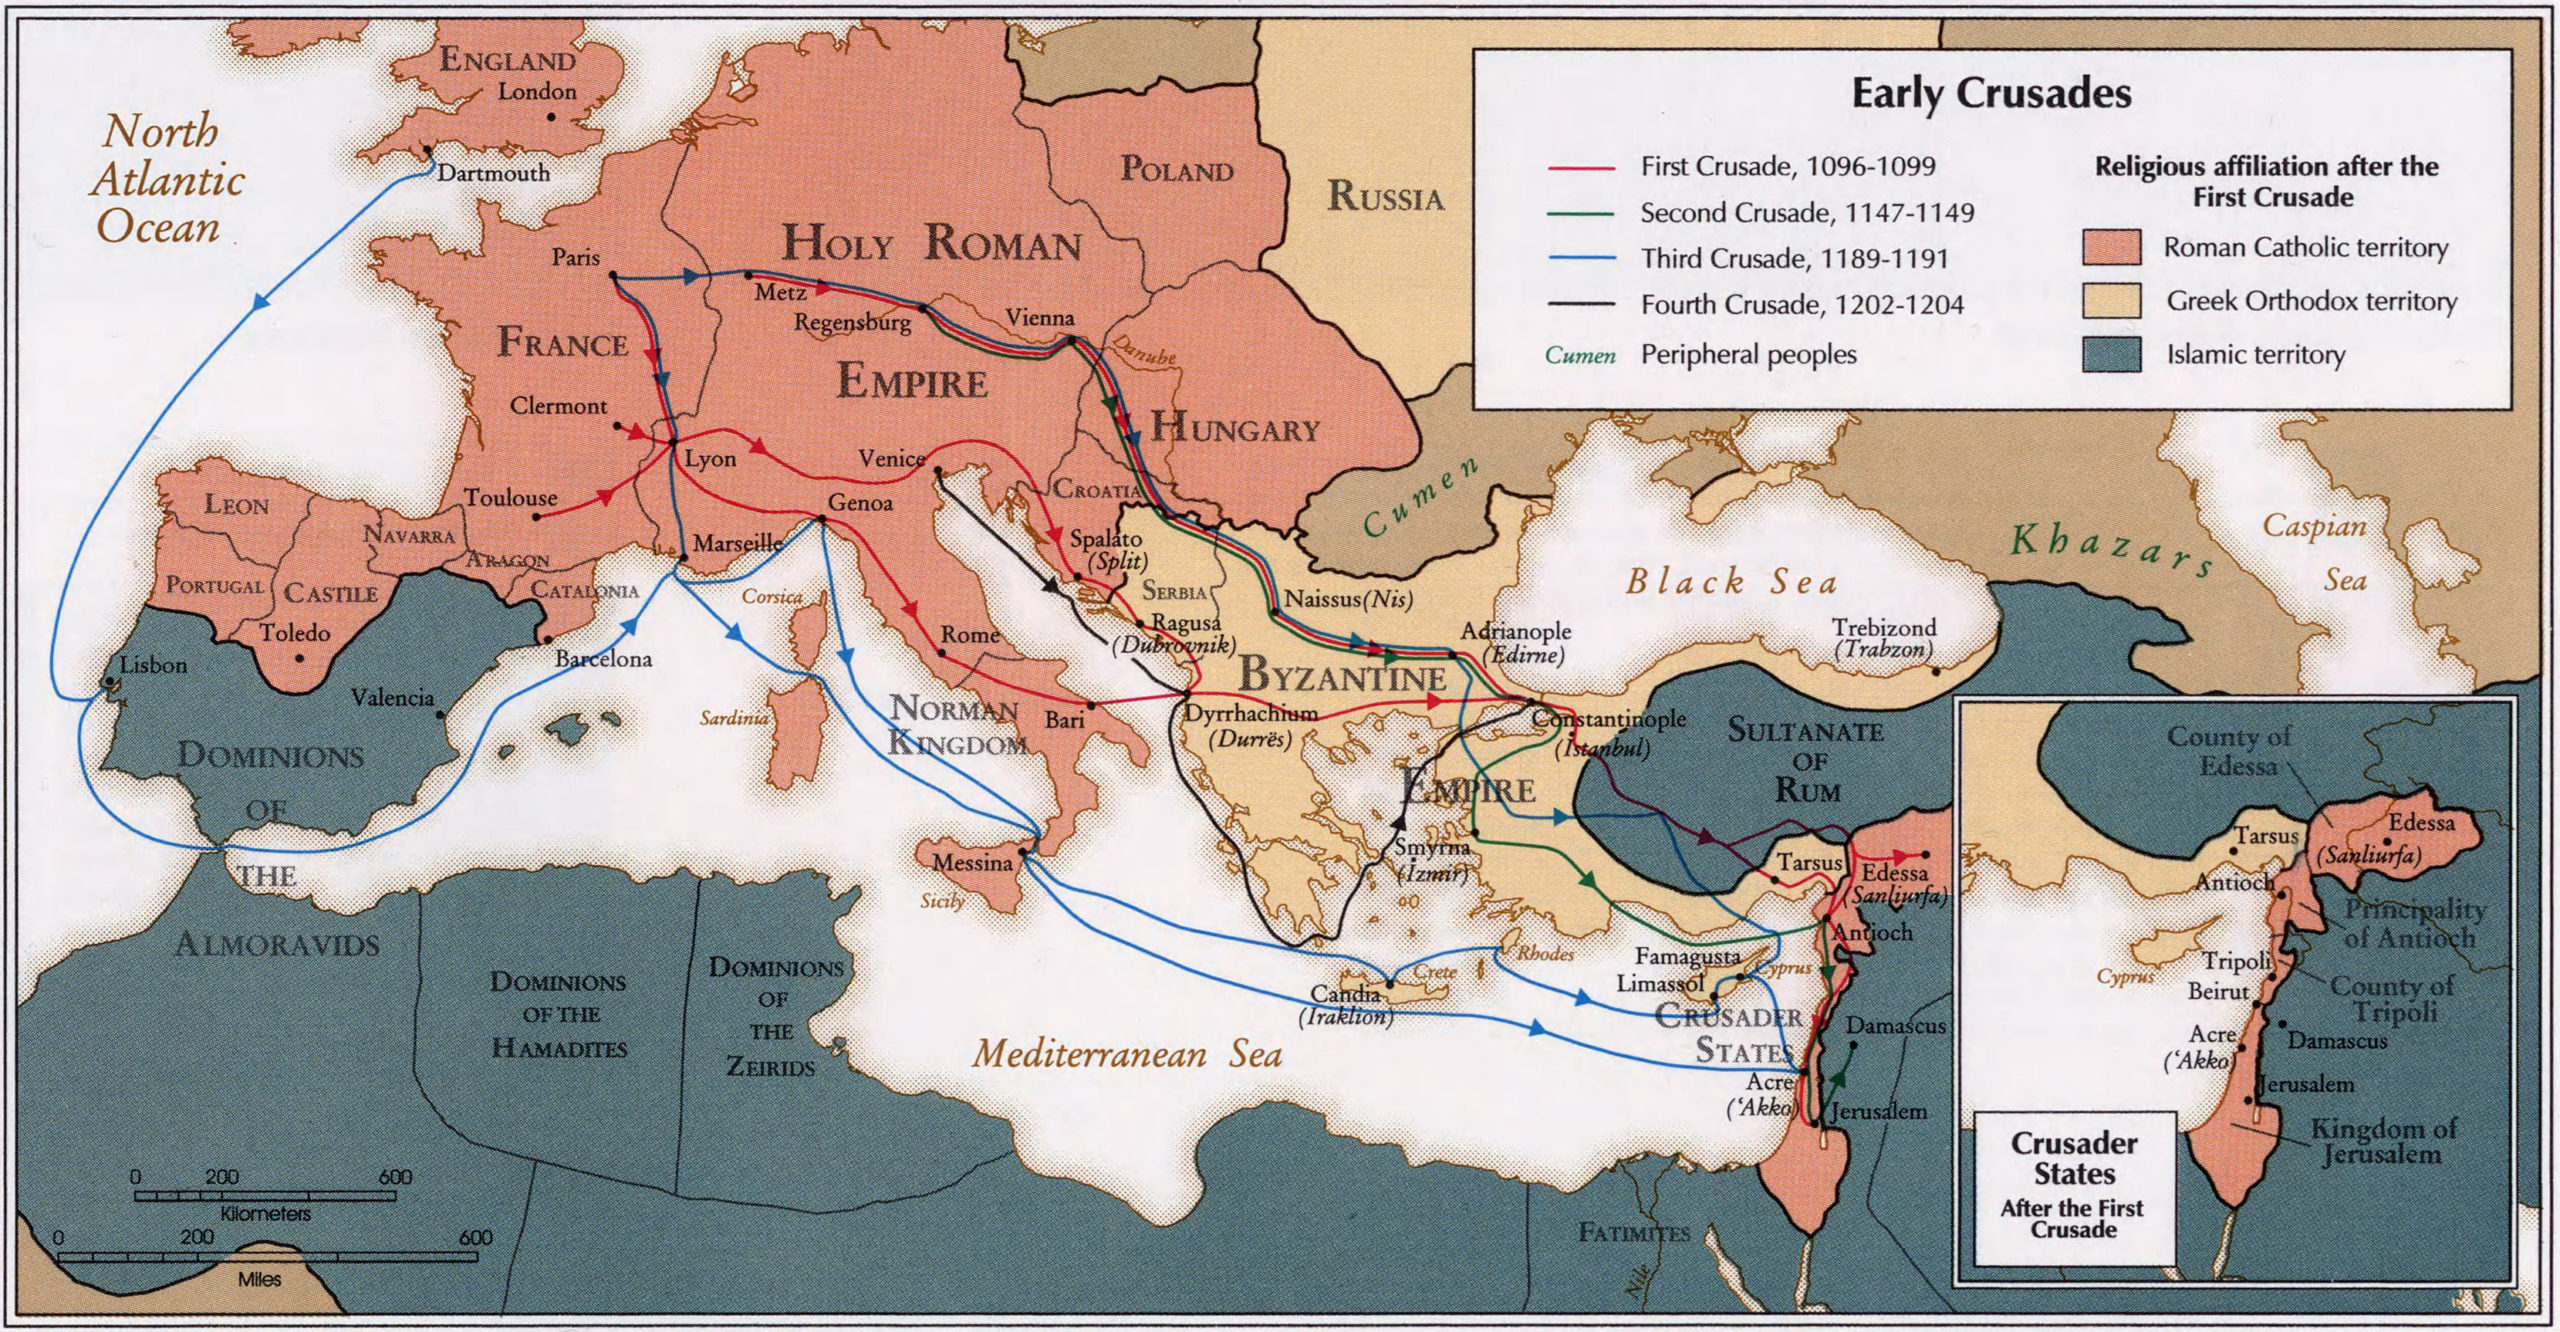 Map with the First through Fourth Crusades, from Atlas of the Middle East (Central Intelligence Agency, 1993)